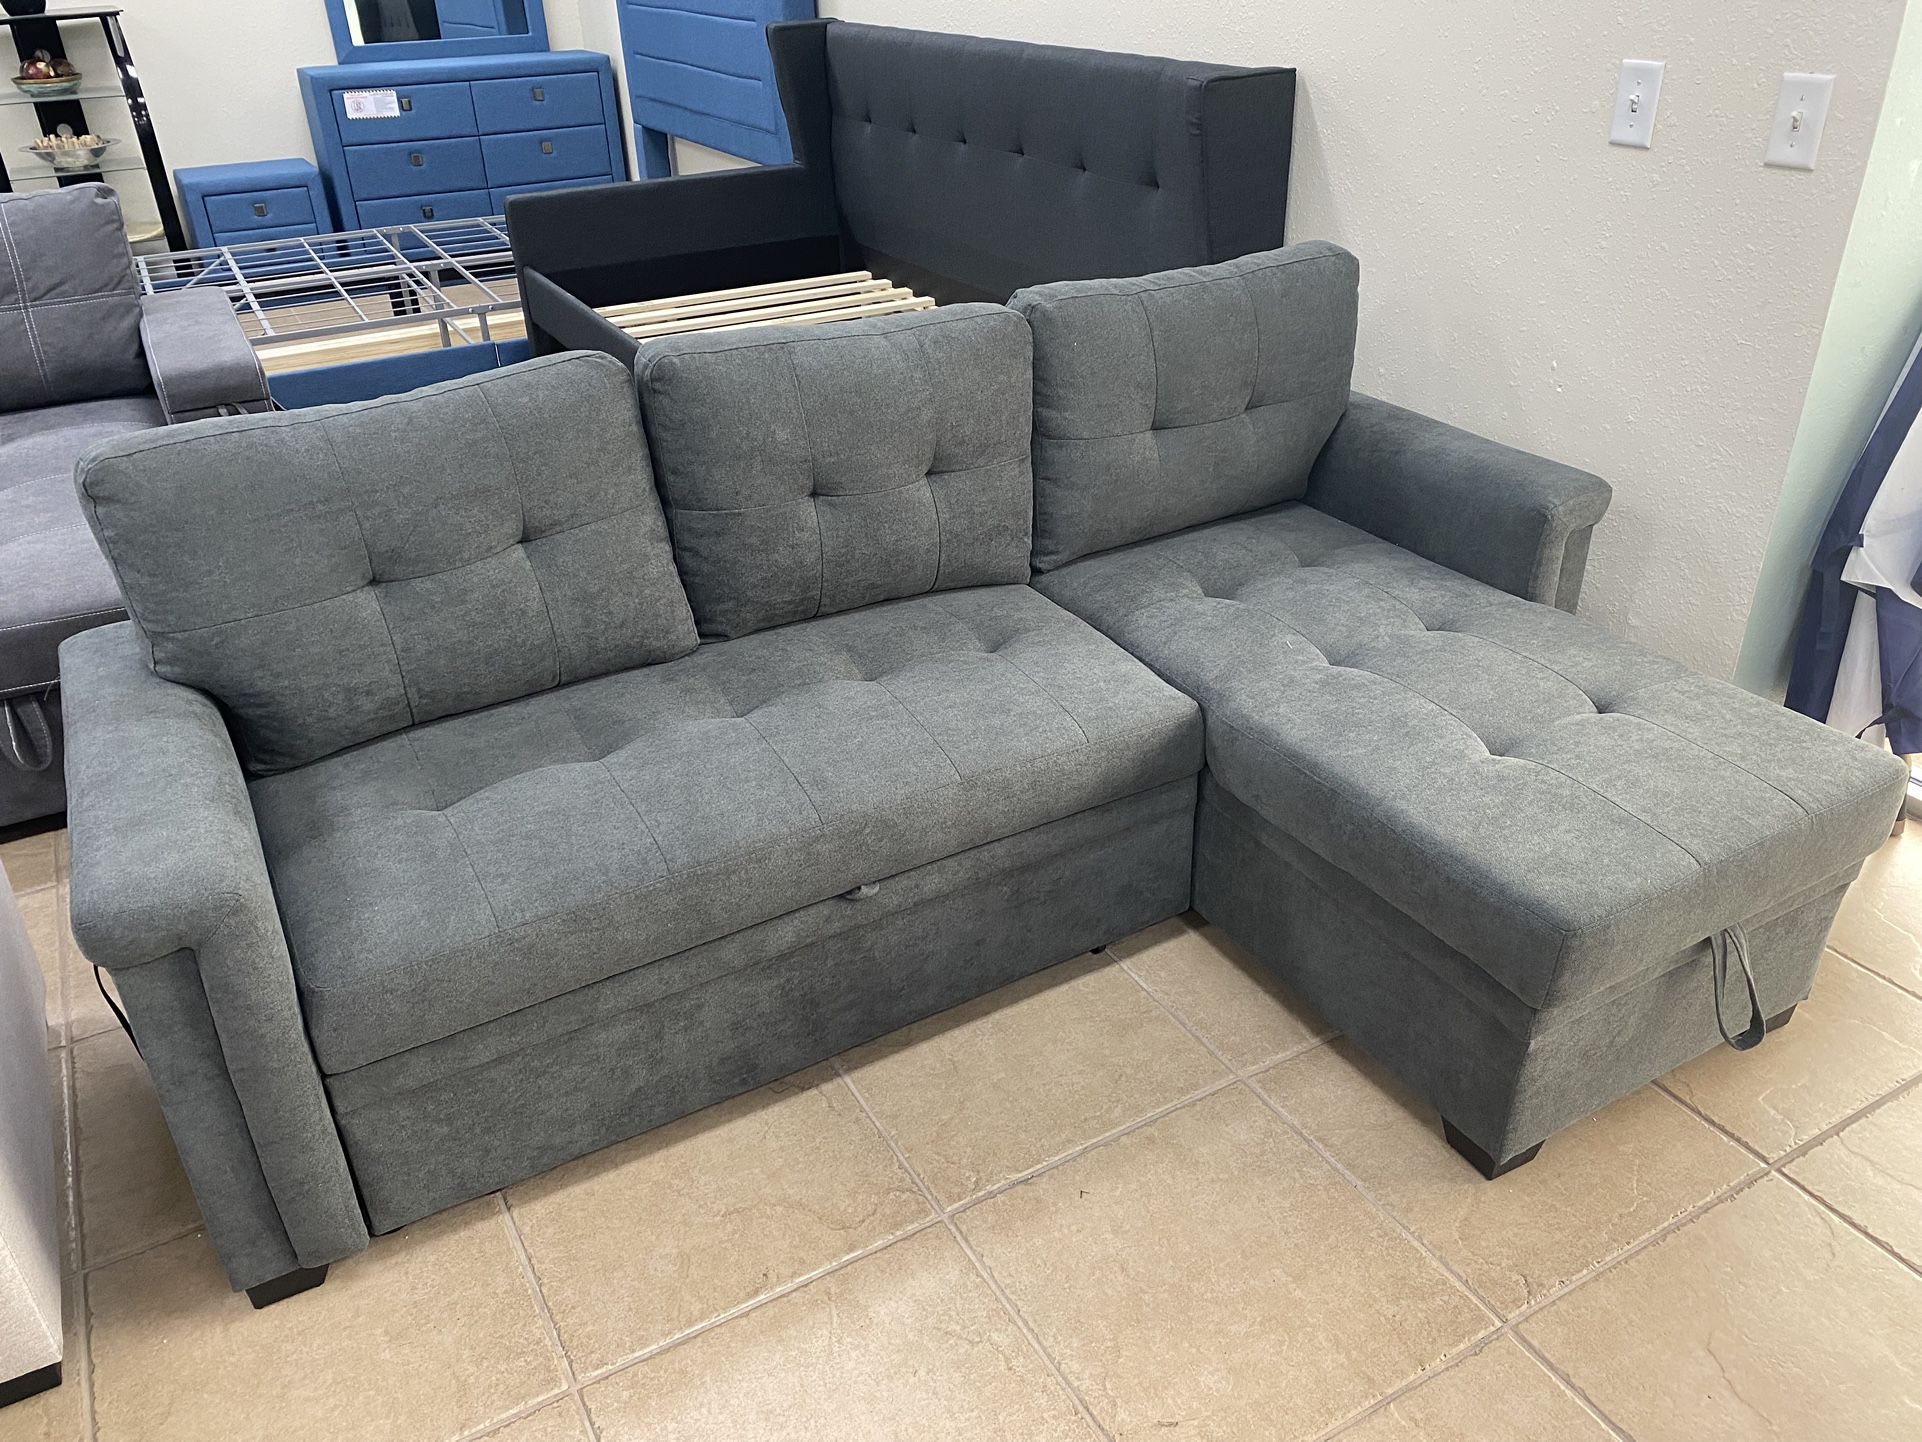 Two-Piece Reversible Sleeper Sectional With Storage $399